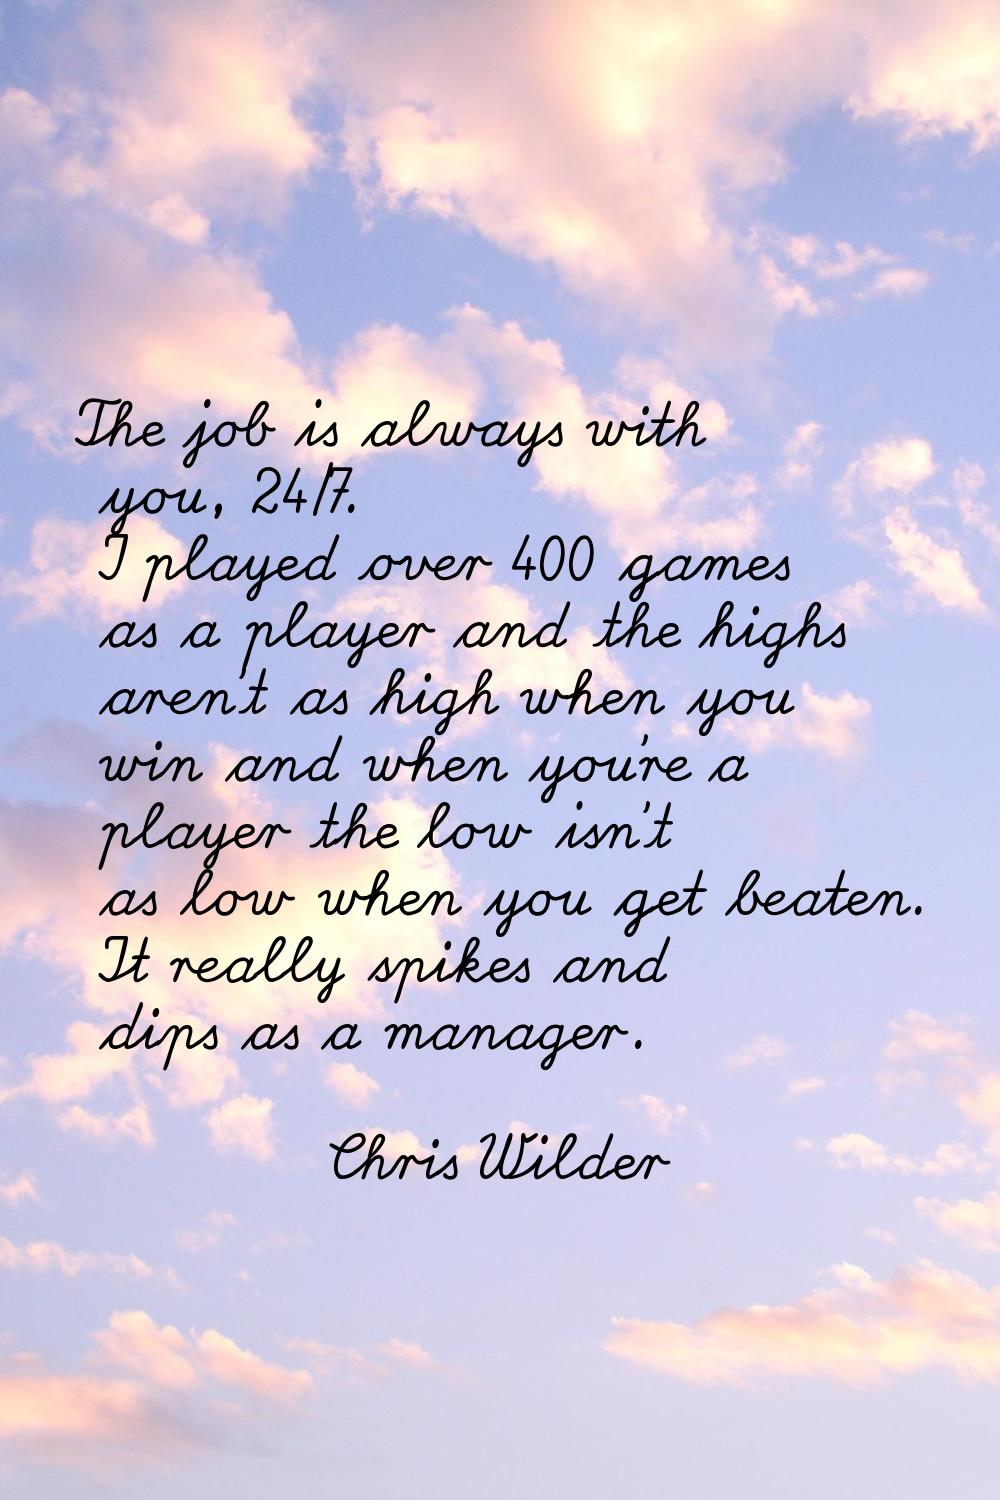 The job is always with you, 24/7. I played over 400 games as a player and the highs aren't as high 